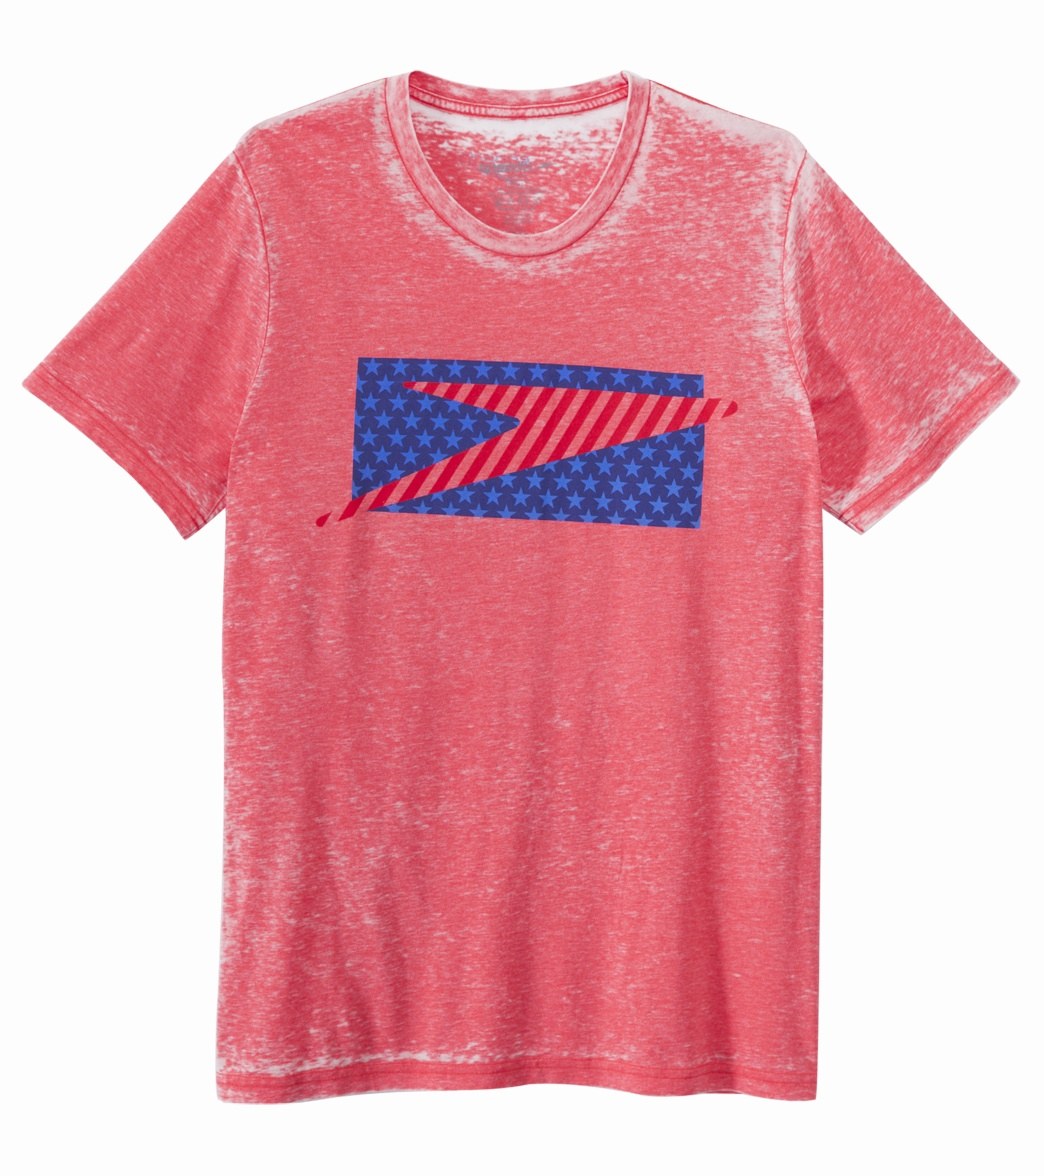 Speedo Men's Star Boom Tee Shirt - Red Large Cotton/Polyester - Swimoutlet.com